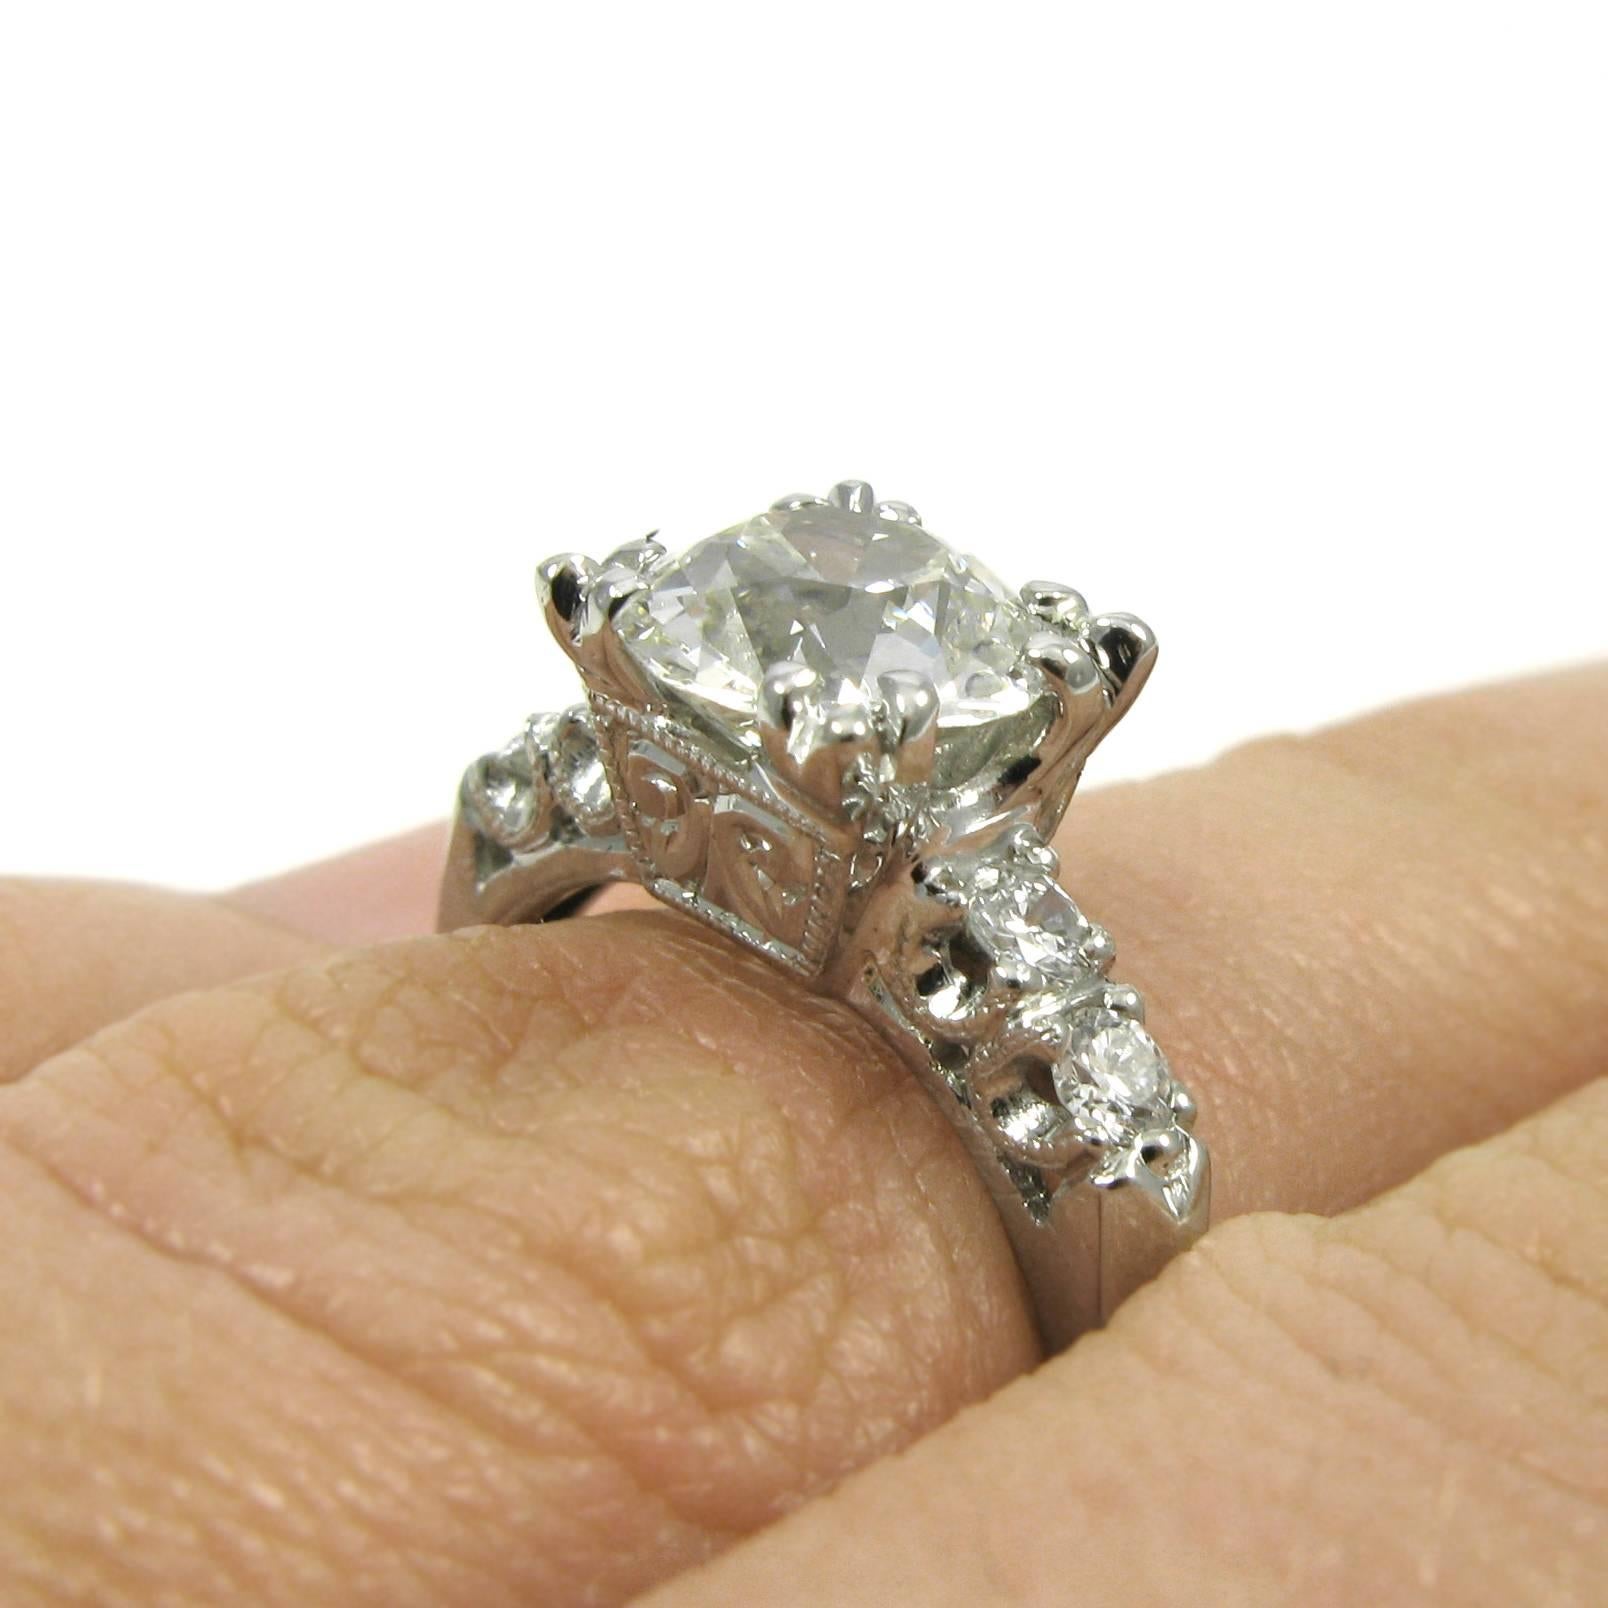 A lovely 18k white gold engagement ring featuring a 1.41 carat Old European-cut diamond with L color and SI1 clarity. The diamond is set in an engraved box setting with trefoil prongs accented by diamond-set shoulders with milgrained fishtail